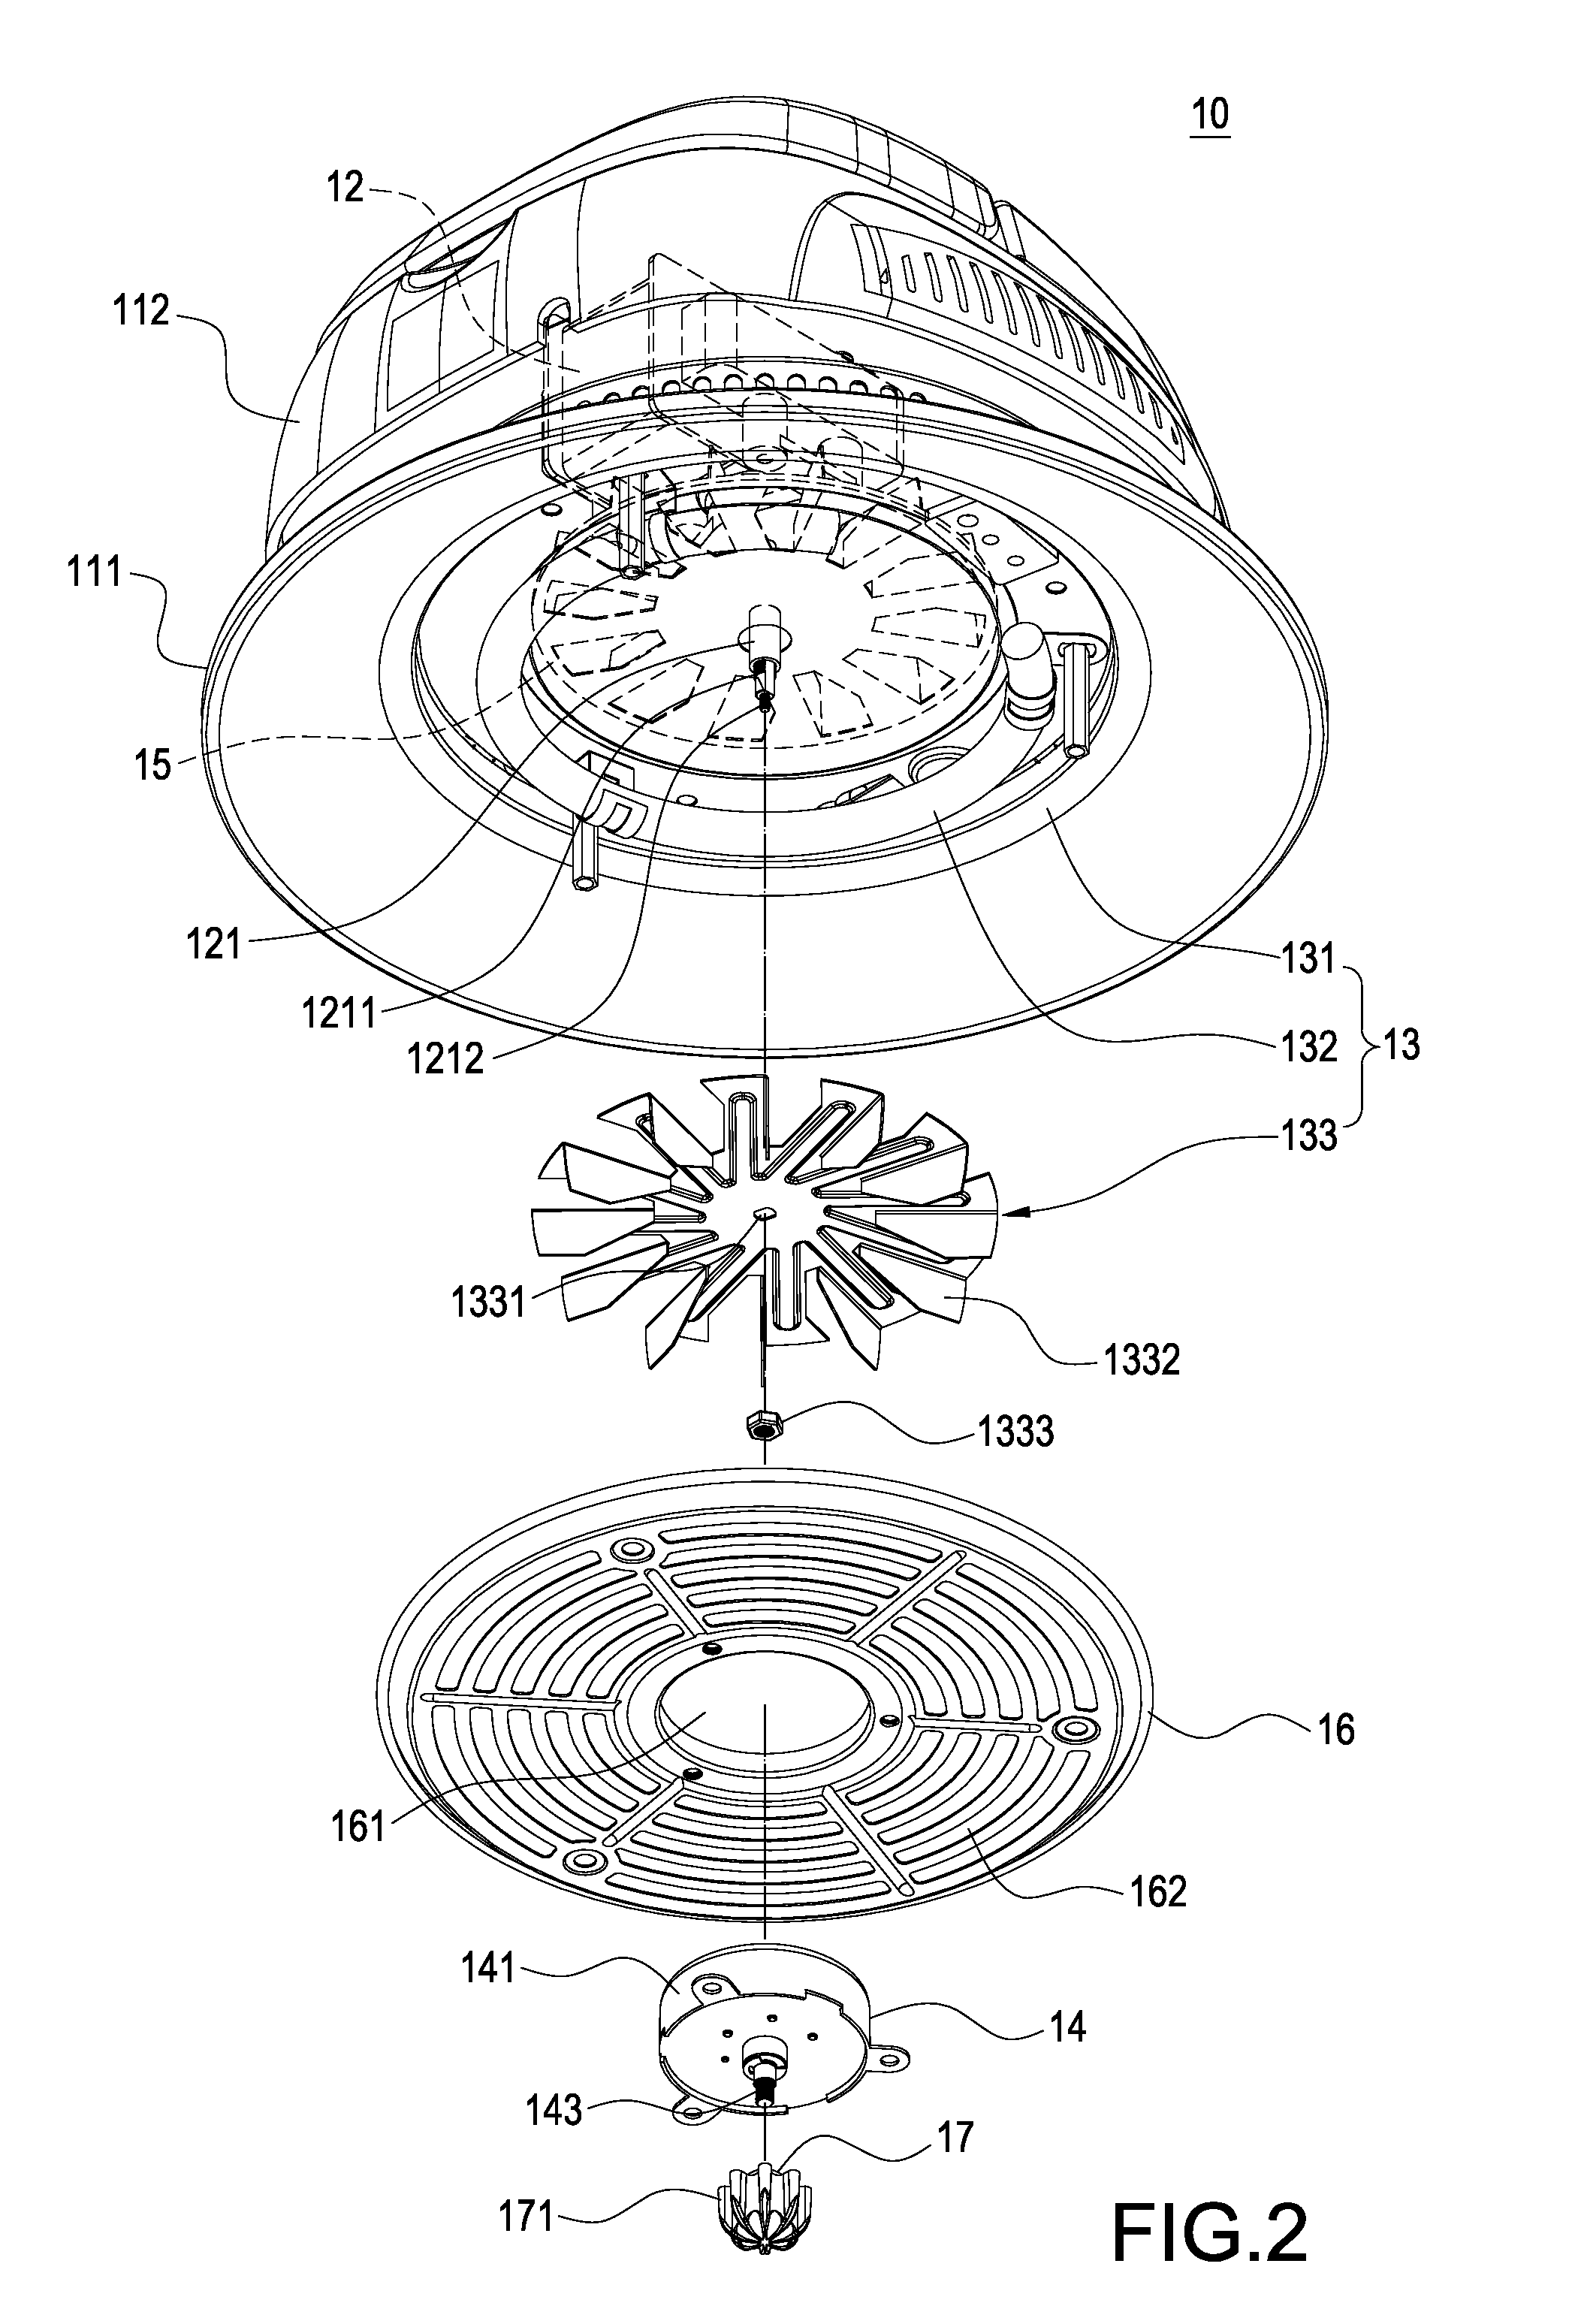 Frying-and-baking oven and heating cover assembly thereof